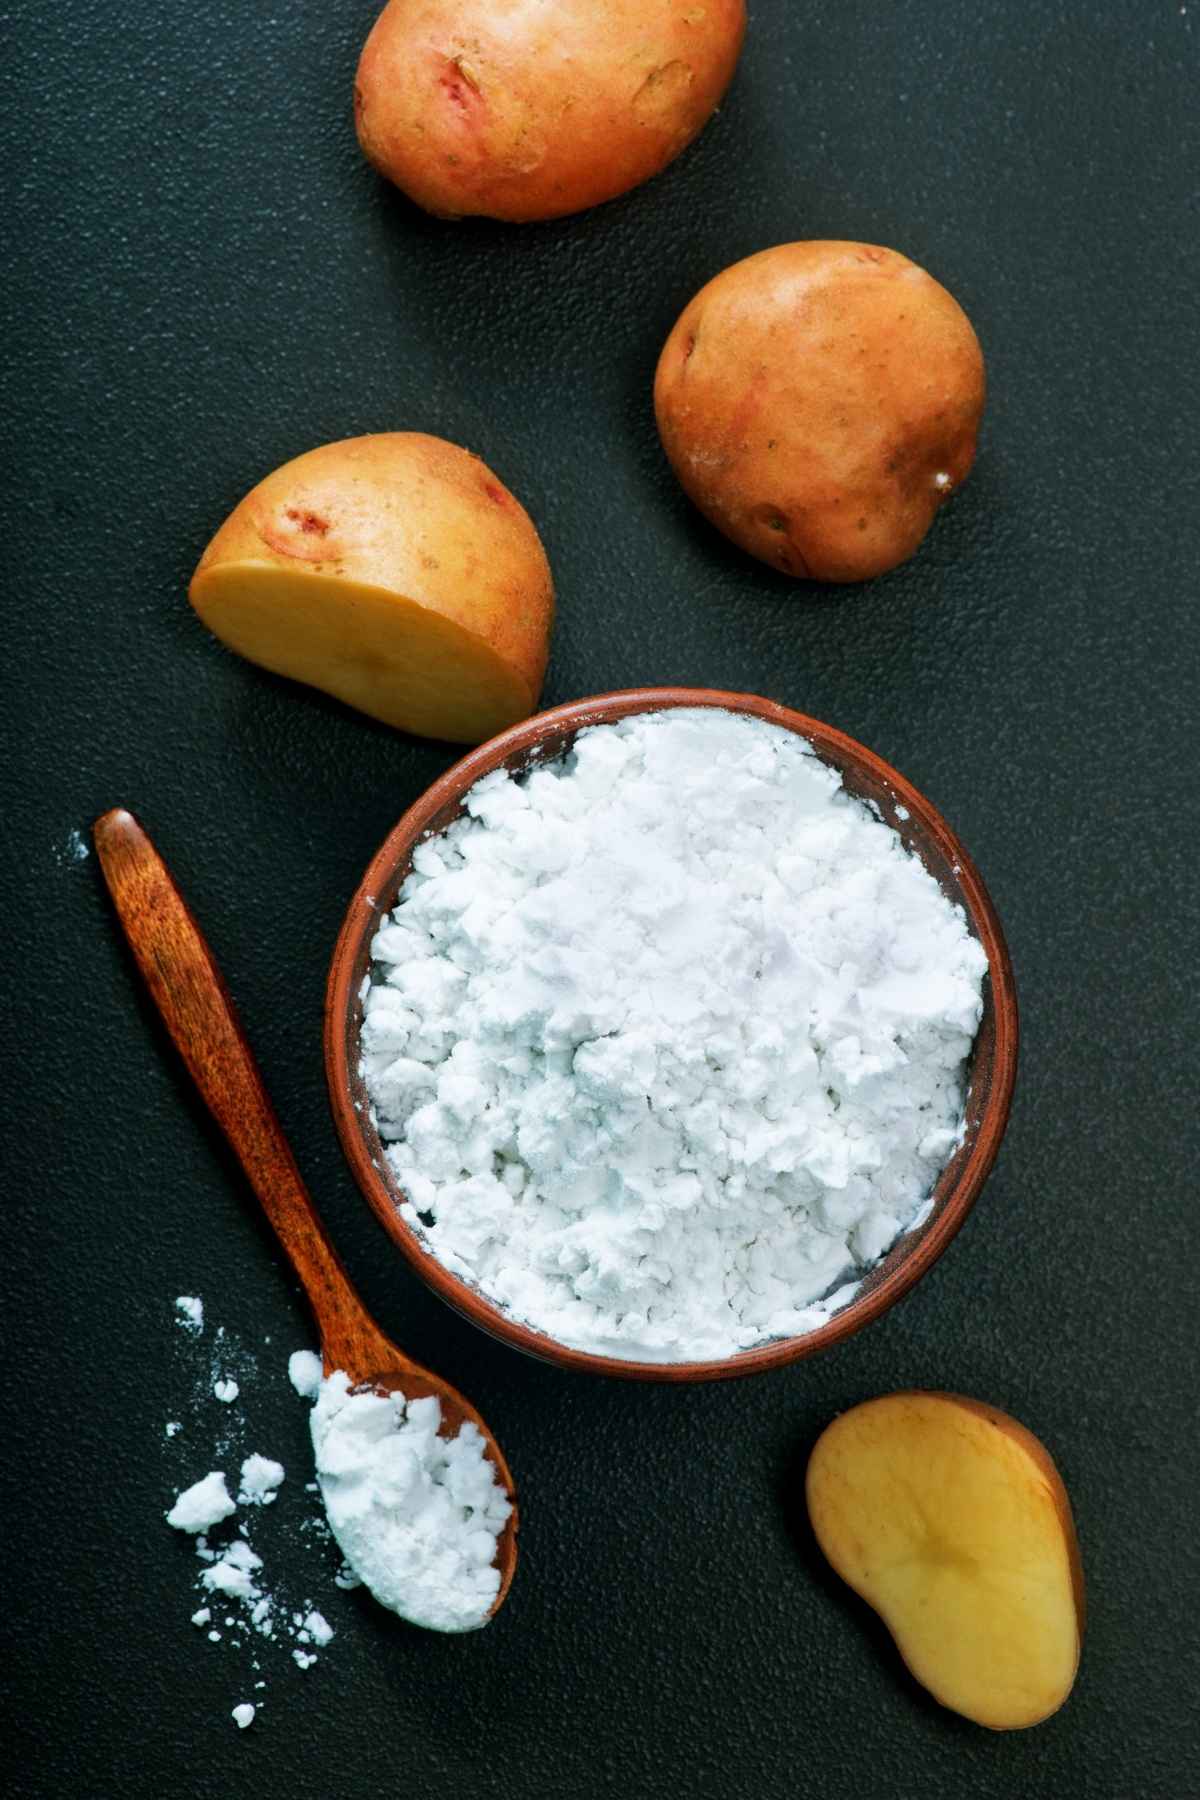 Often used as a thickener, tapioca is a very starchy flour. If you’re making a recipe that calls for tapioca flour, there are alternatives you can use if you don’t have any on hand. Depending on where you live, it may be a challenge finding tapioca flour at your local grocery store.